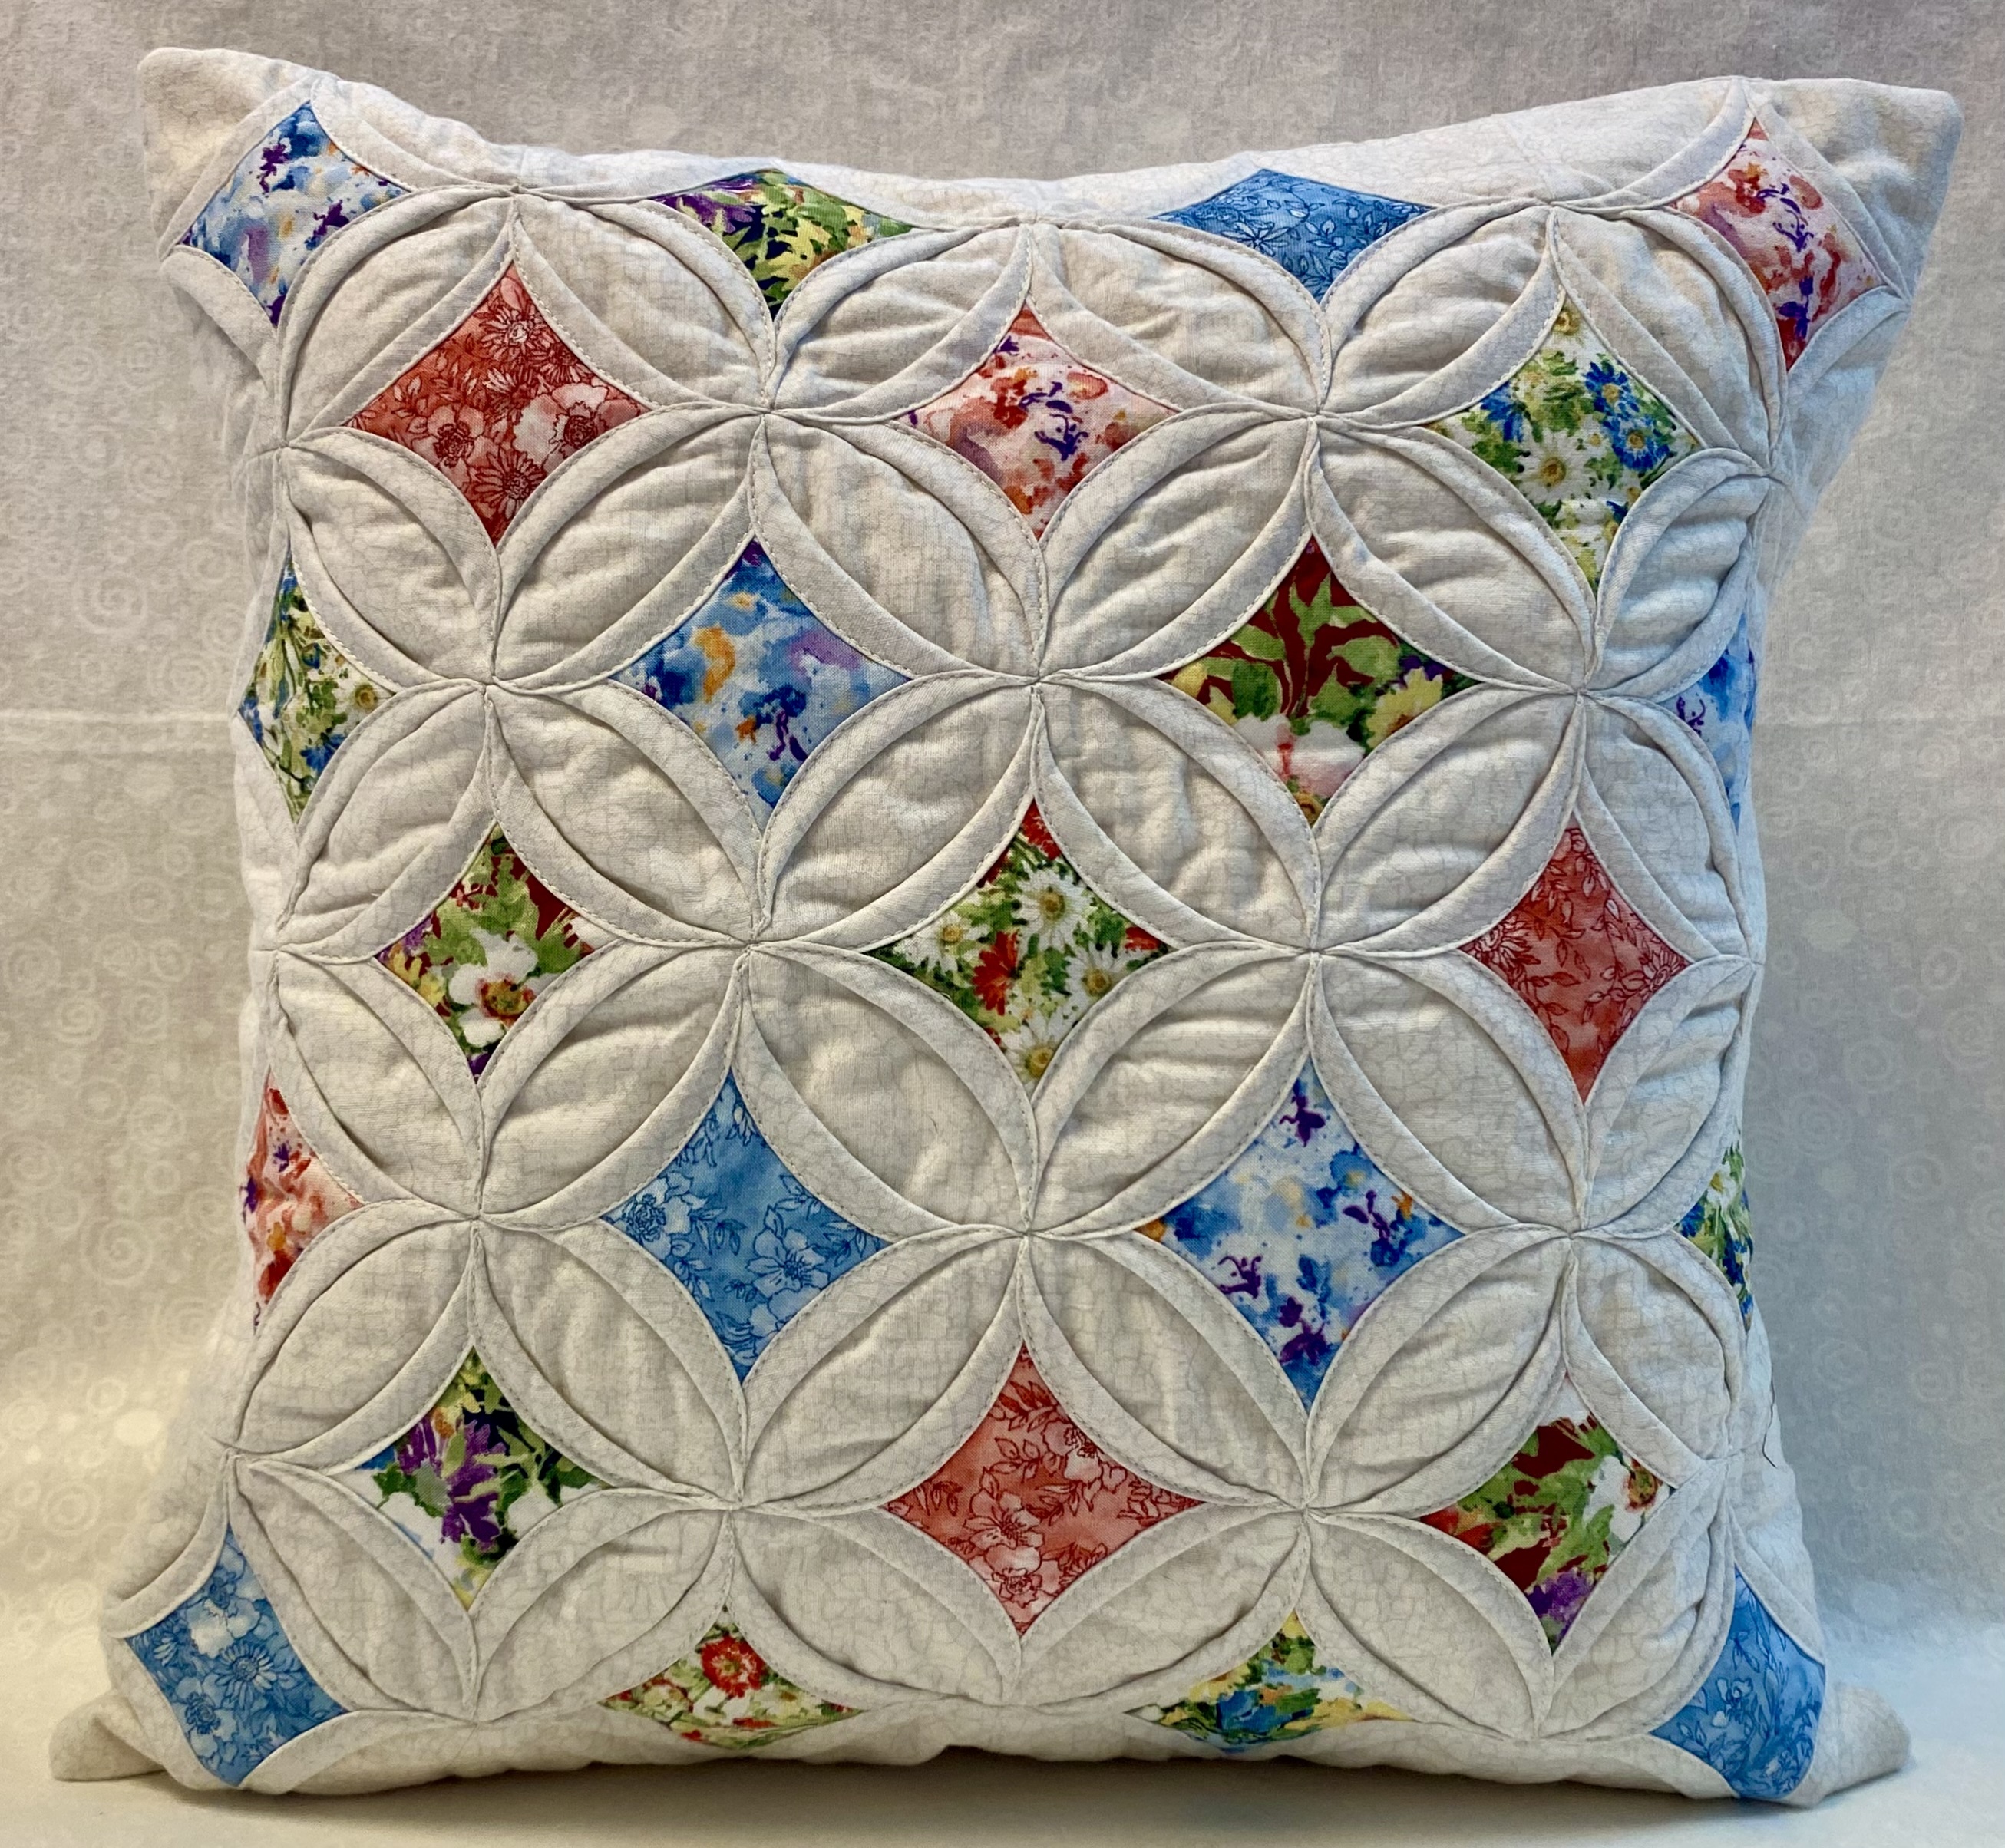 Cathedral Window Pillow Cover - 16” 59210